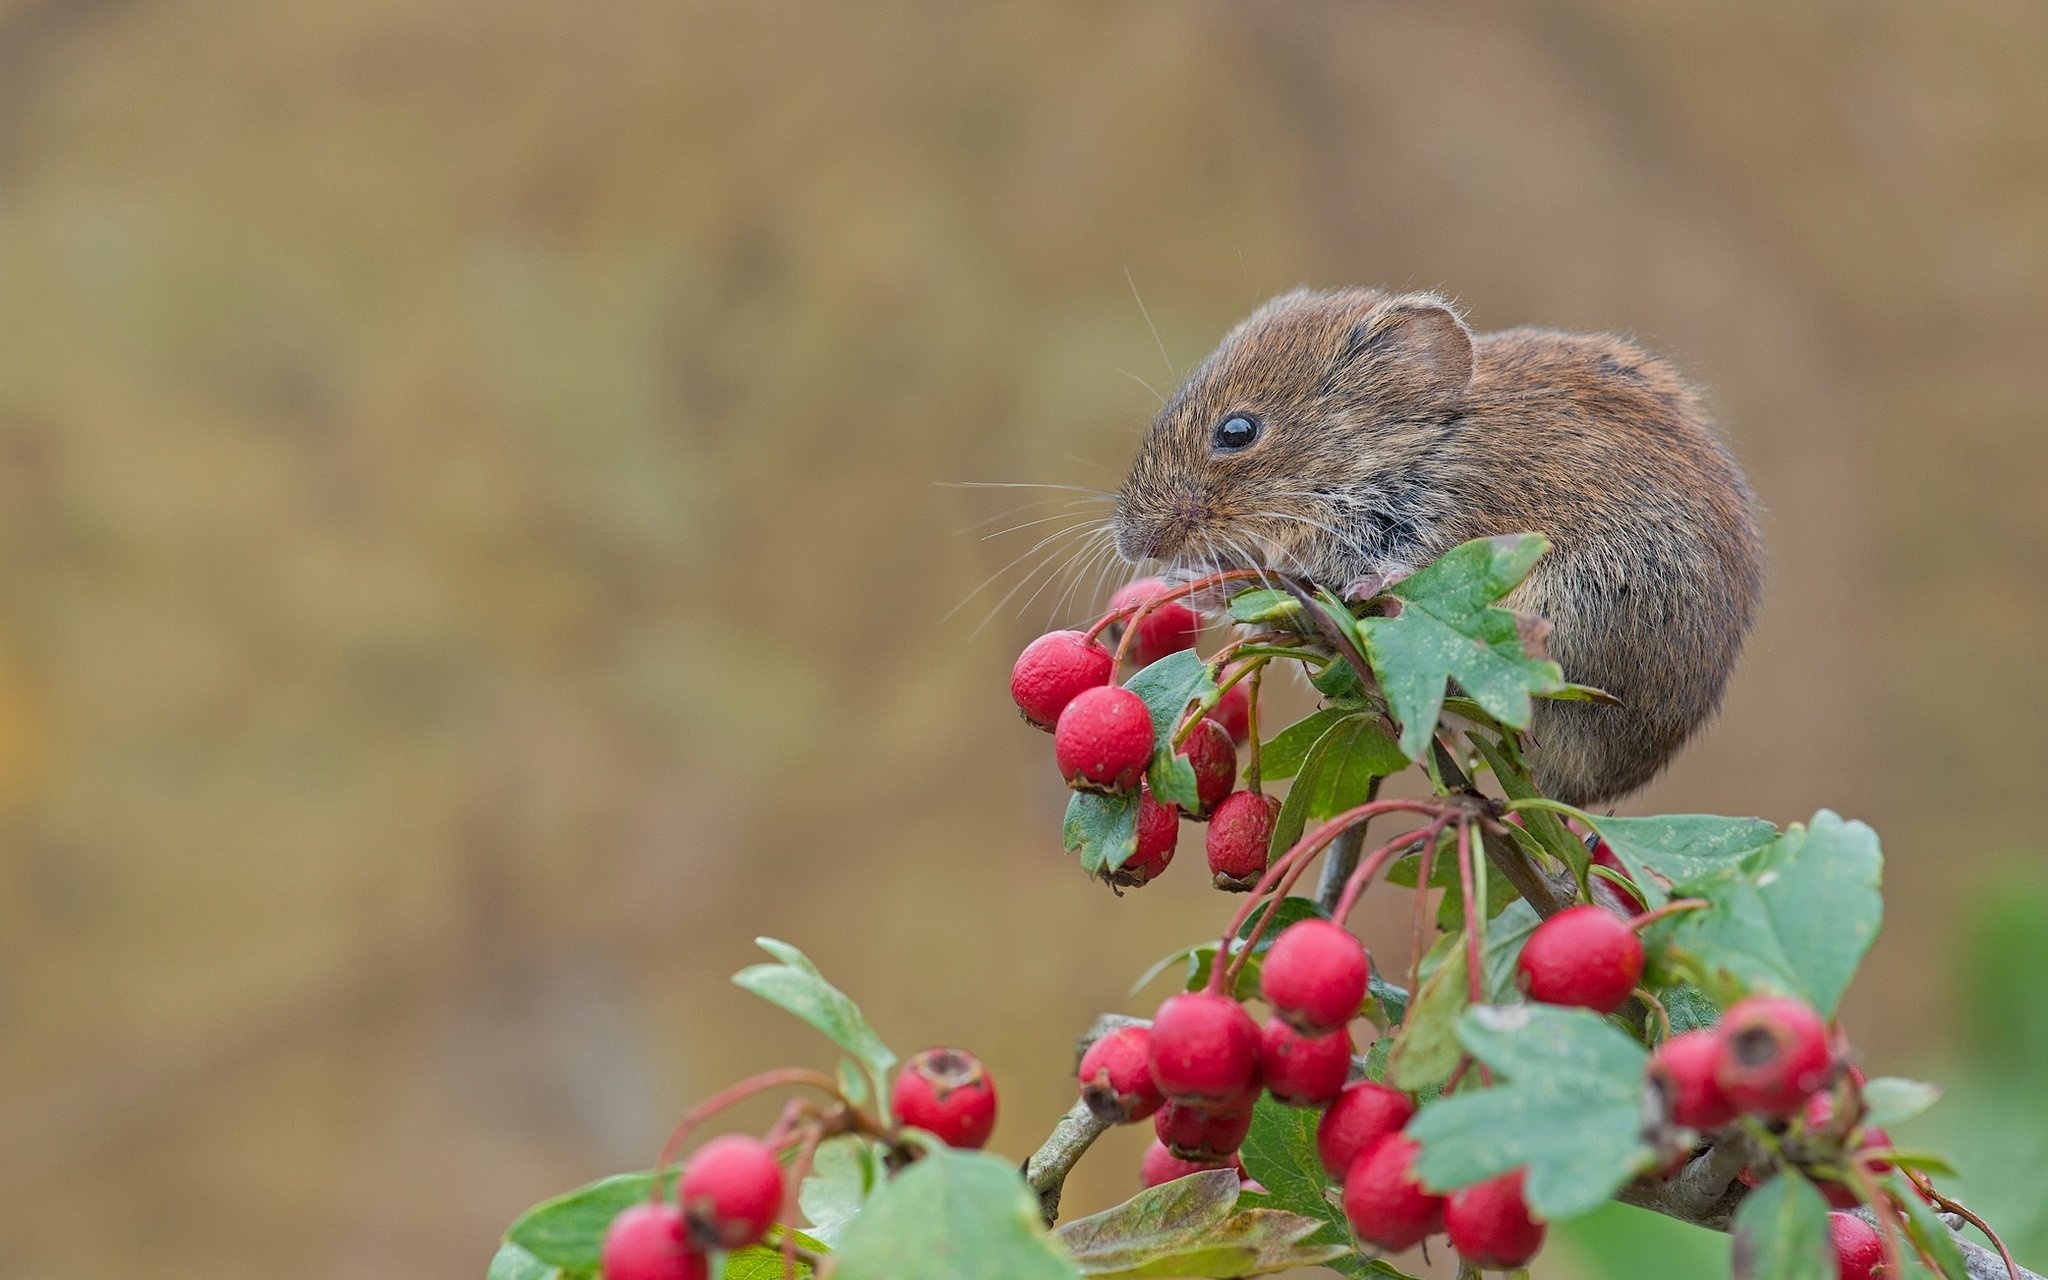 Red vole mouse, Rodent berries, Hawthorn branch, Close up, 2050x1280 HD Desktop